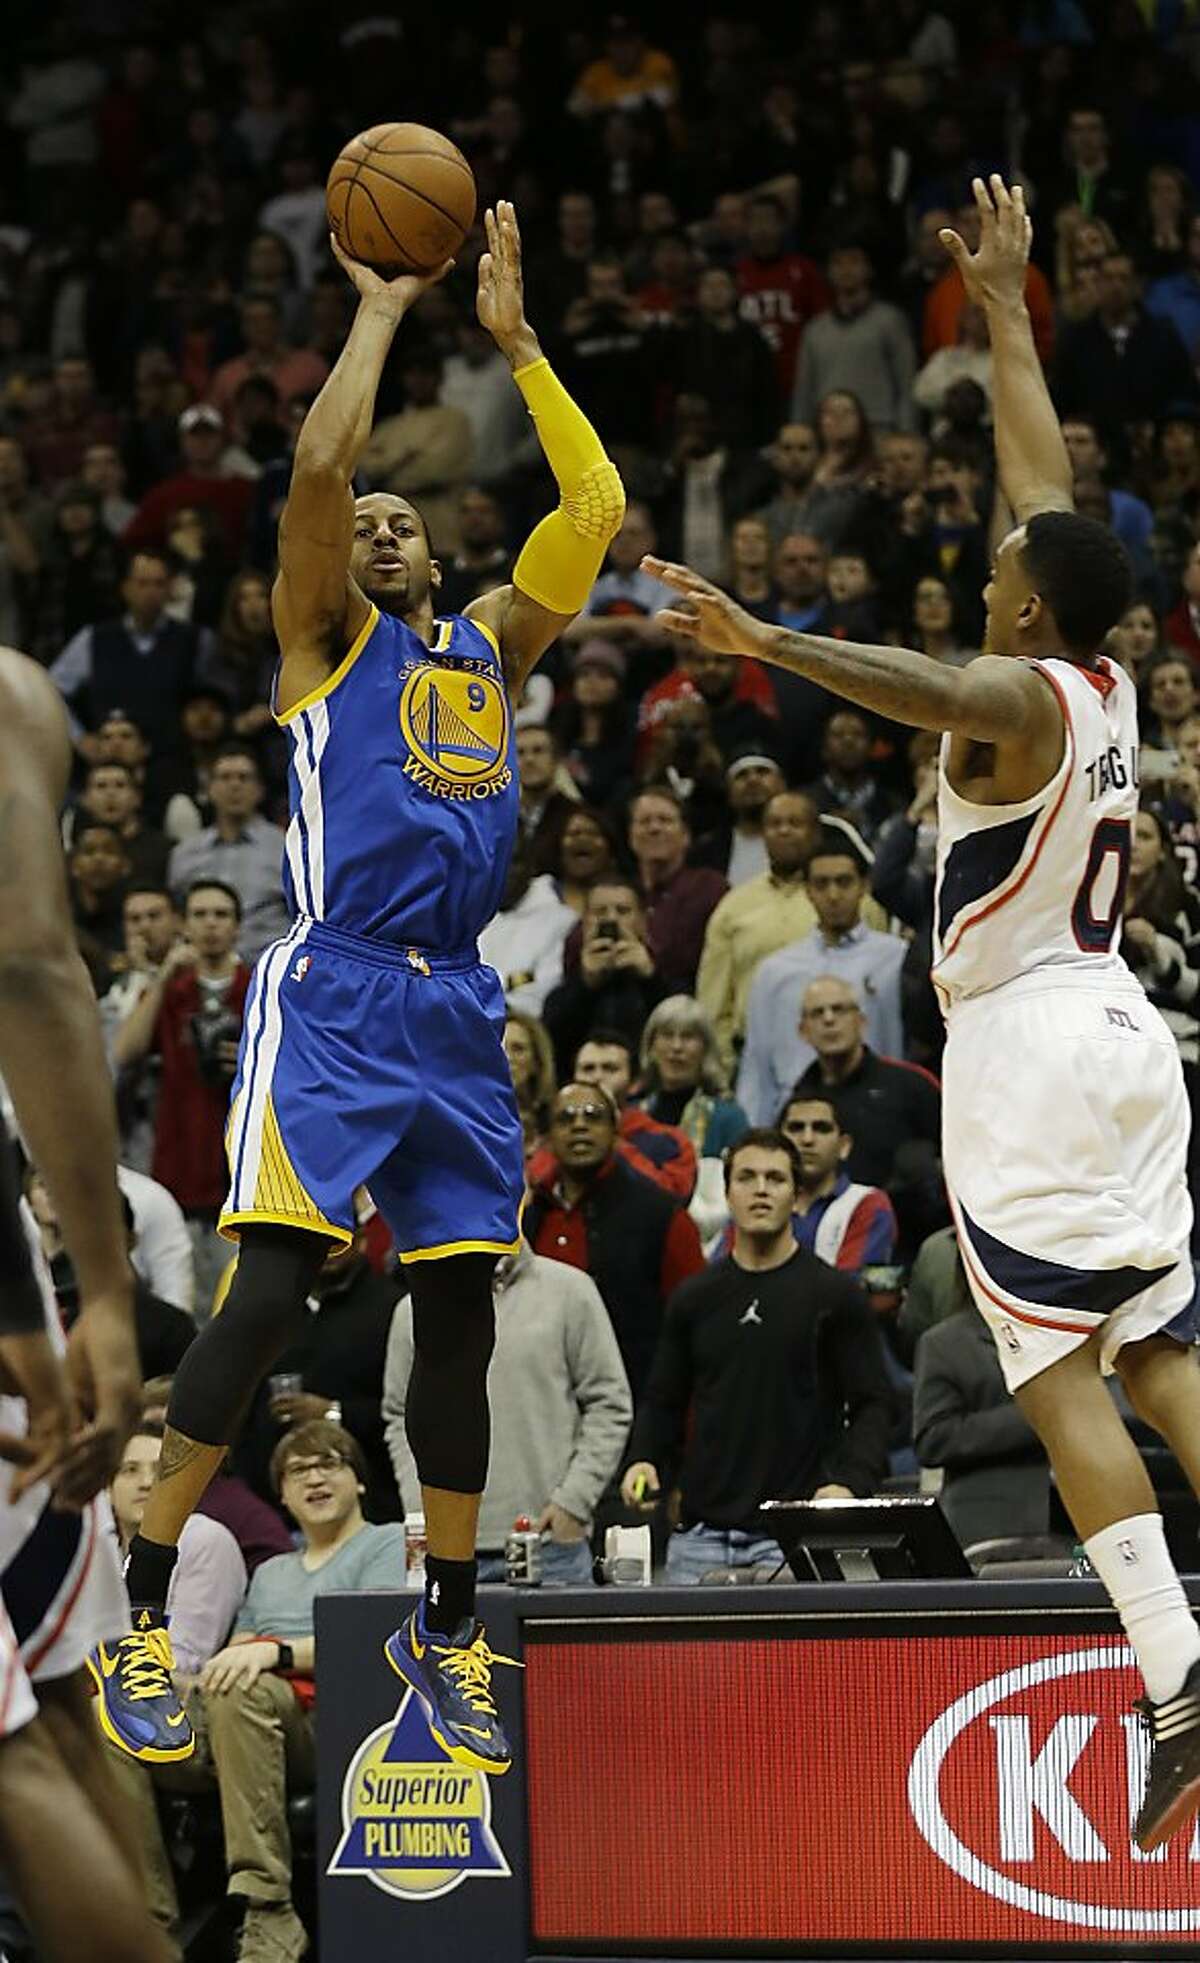 Golden State Warriors small forward Andre Iguodala (9) hits a three-point basket to give the Warriors a 101-100 win over the Atlanta Hawks as time expires in the second half of an NBA basketball game on Friday, Jan. 3, 2014, in Atlanta. Atlanta Hawks point guard Jeff Teague (0) defends. (AP Photo/John Bazemore)